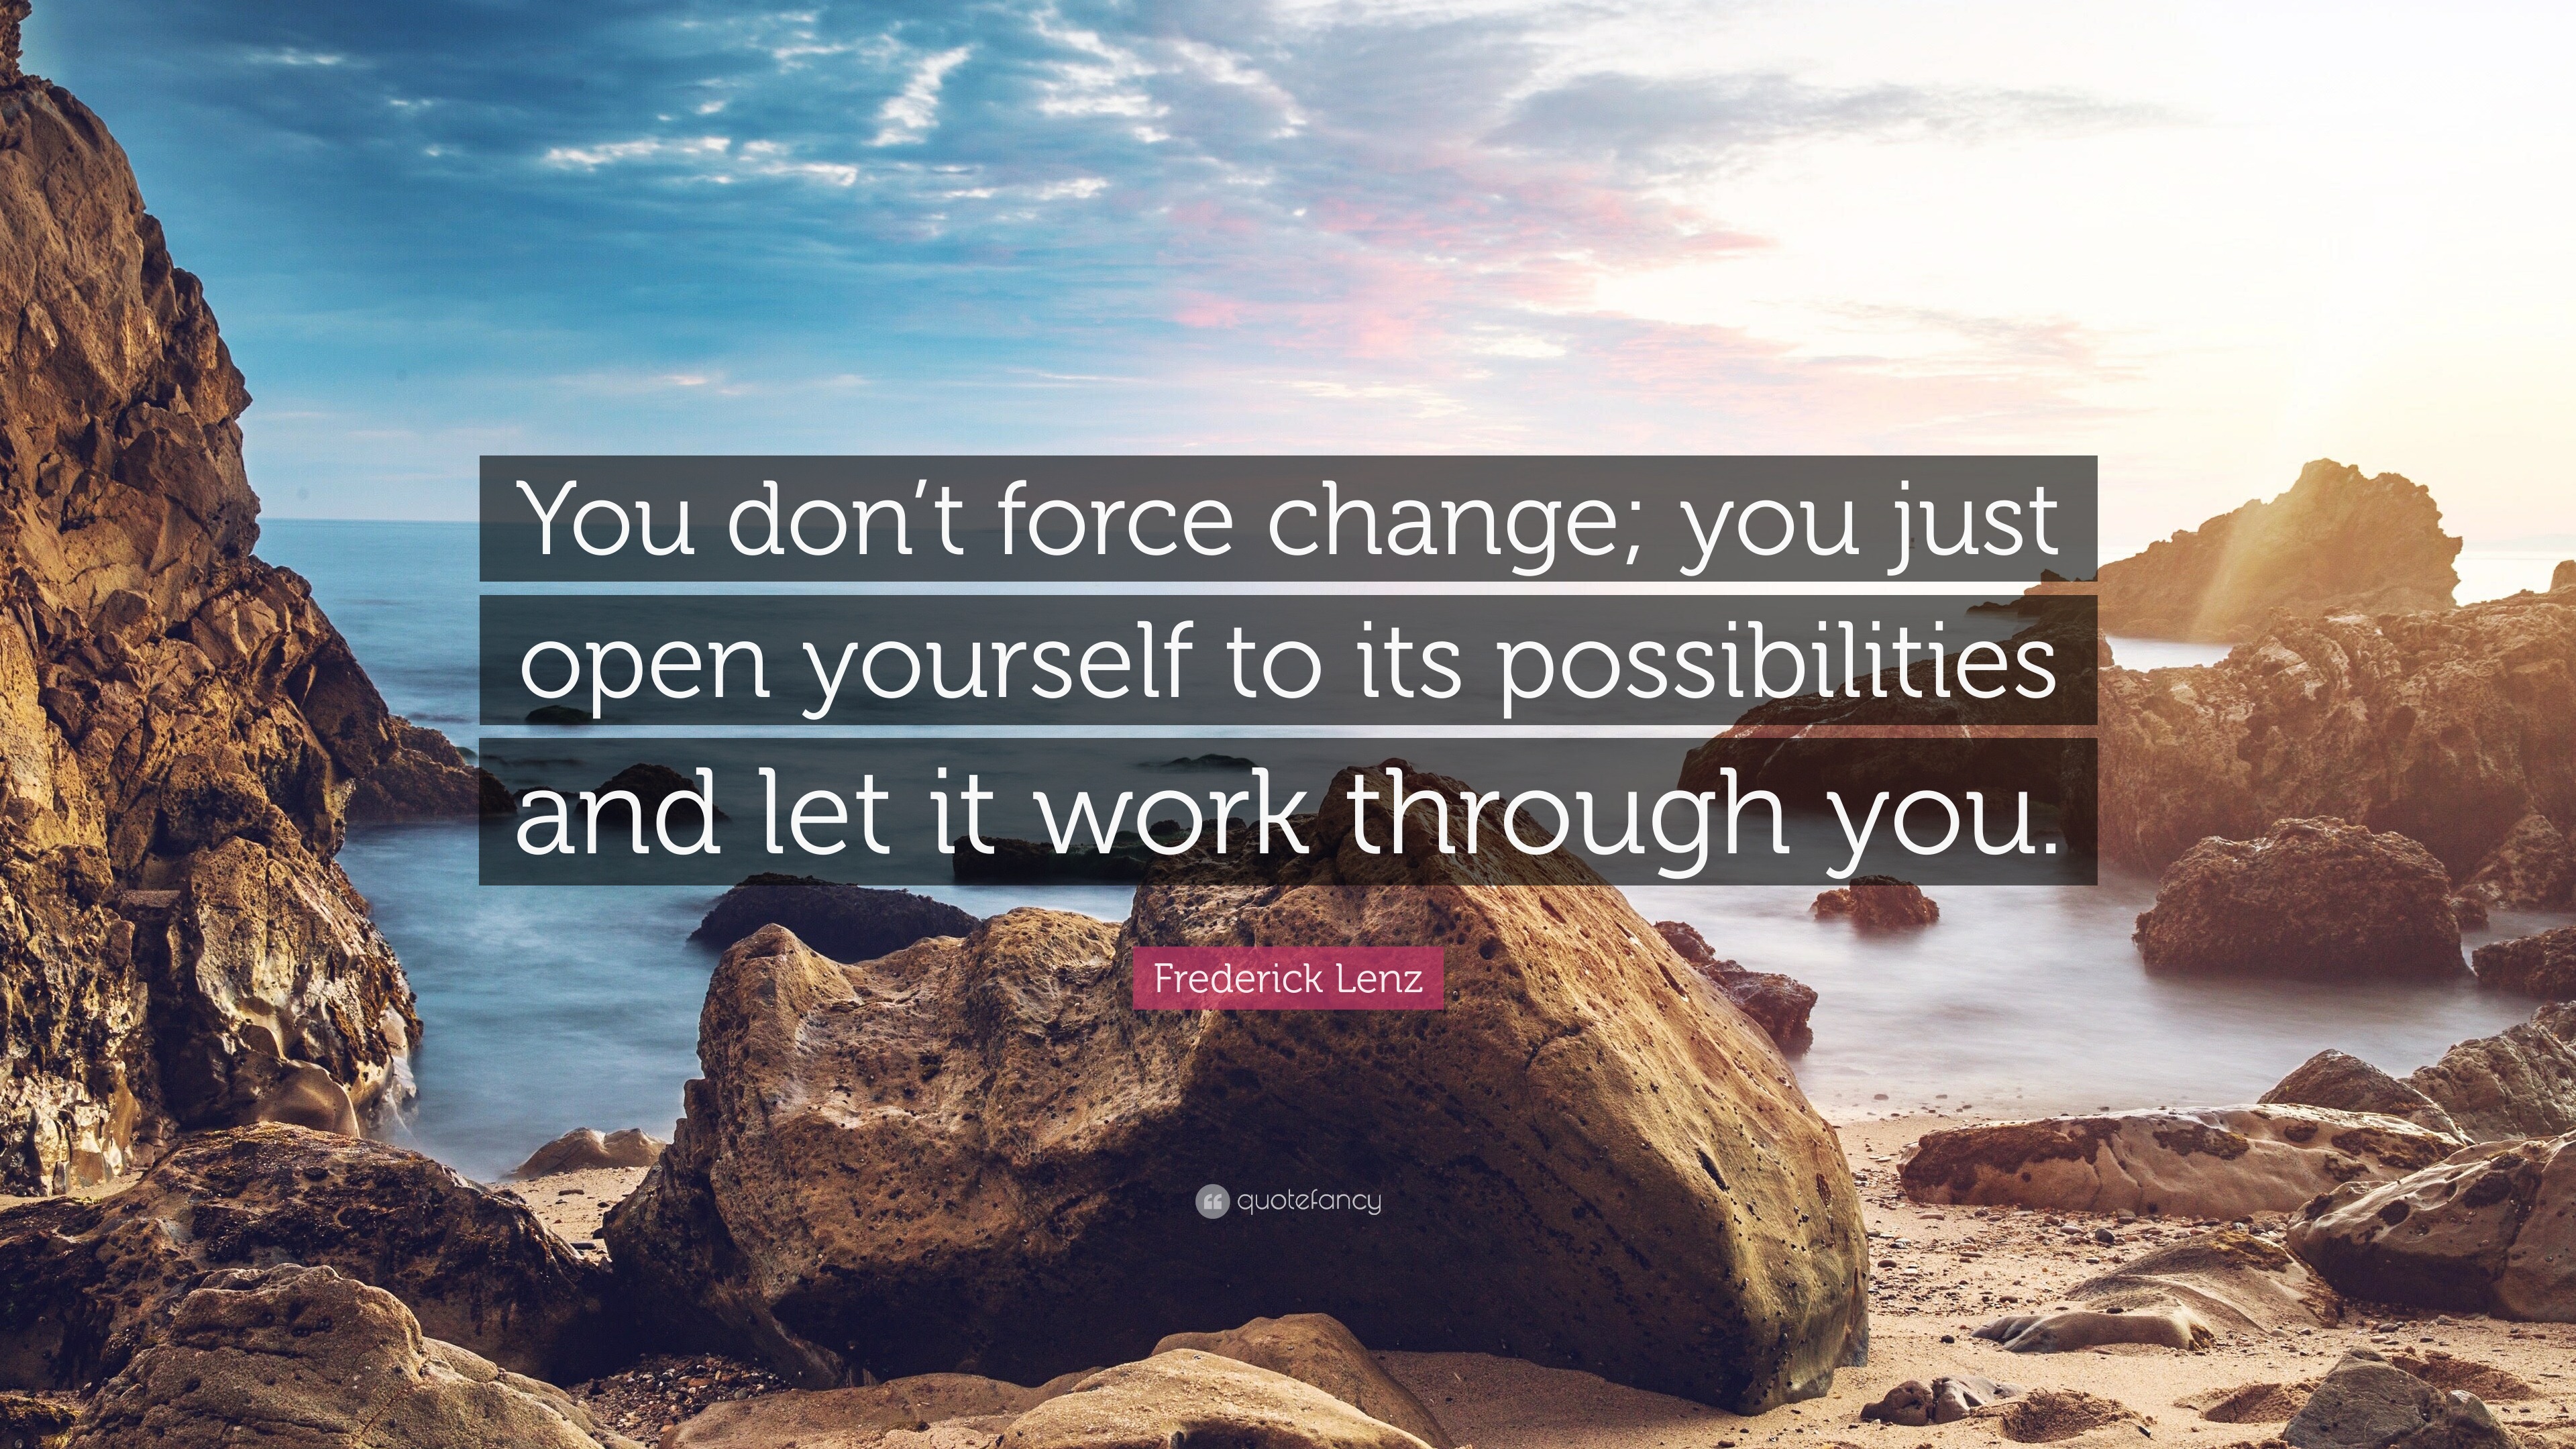 Frederick Lenz Quote: “You don’t force change; you just open yourself ...